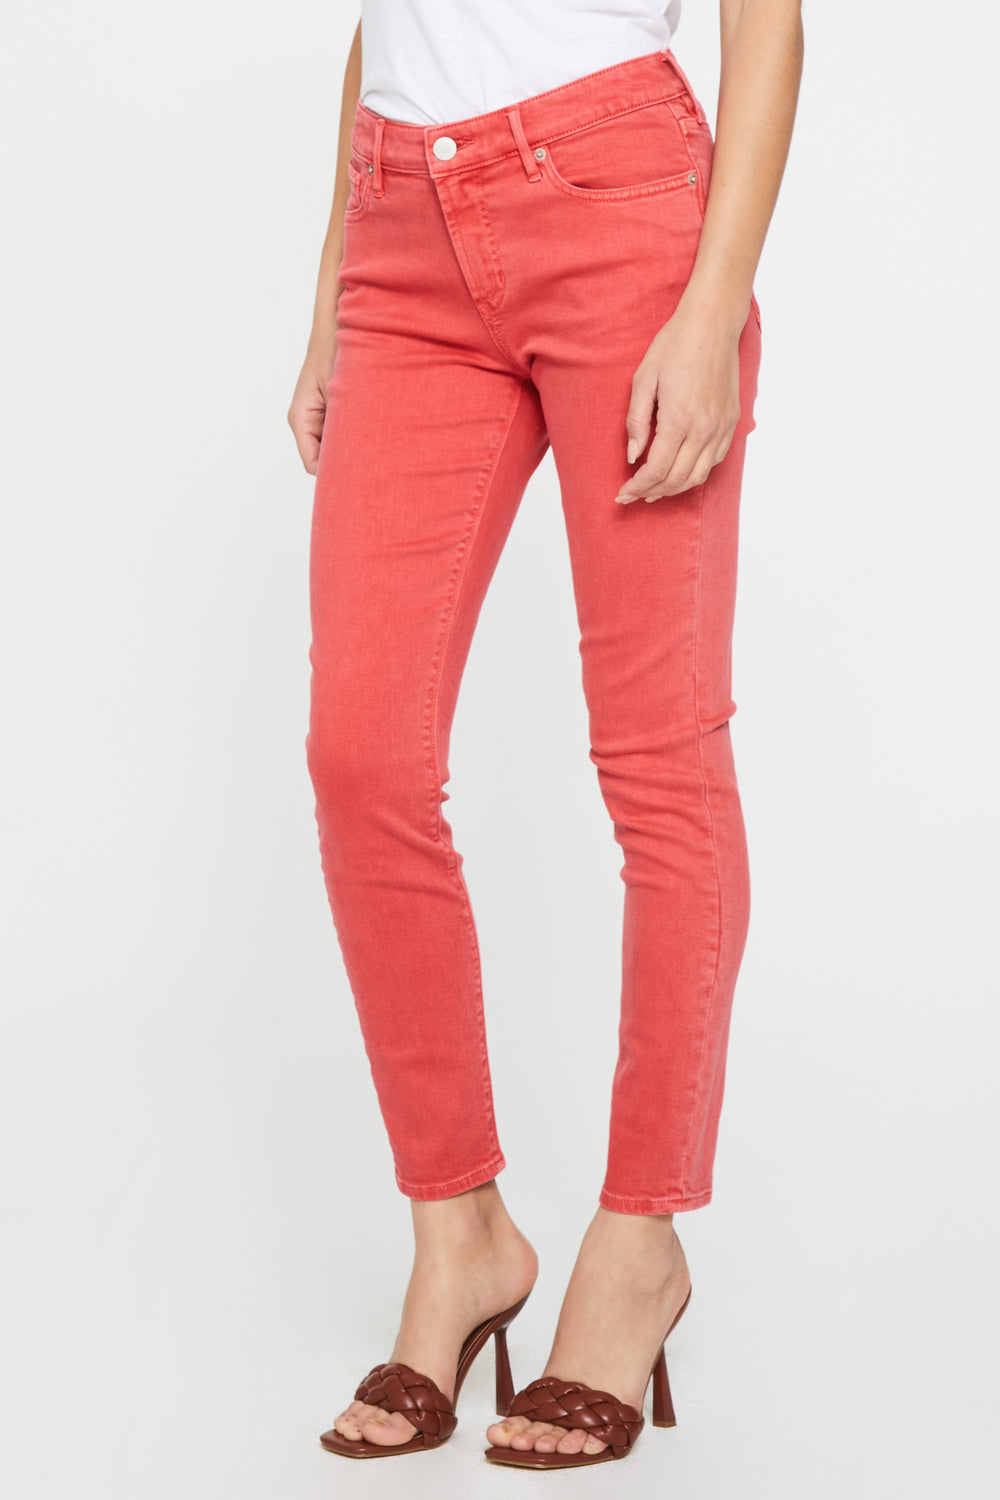 image of a female model wearing a GISELE HIGH RISE ANKLE SKINNY JEANS SCARLET JEANS